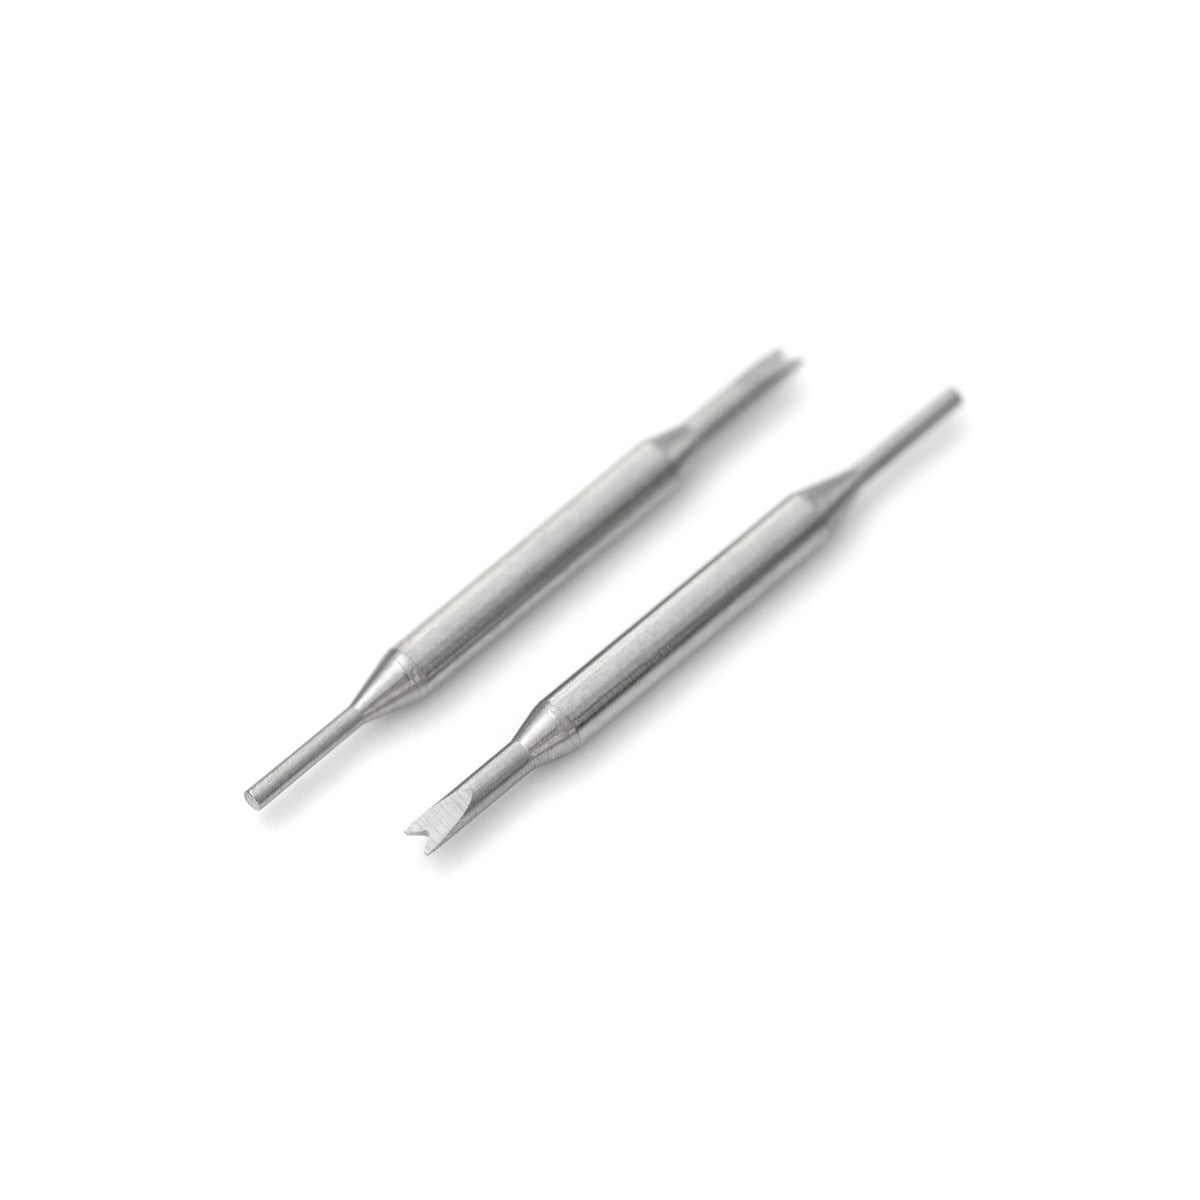 2 pcs of Reversible Pin and Fork Blades for Replacement of Compact Economy Spring Bar Tool (Standard) Strapcode watch bands